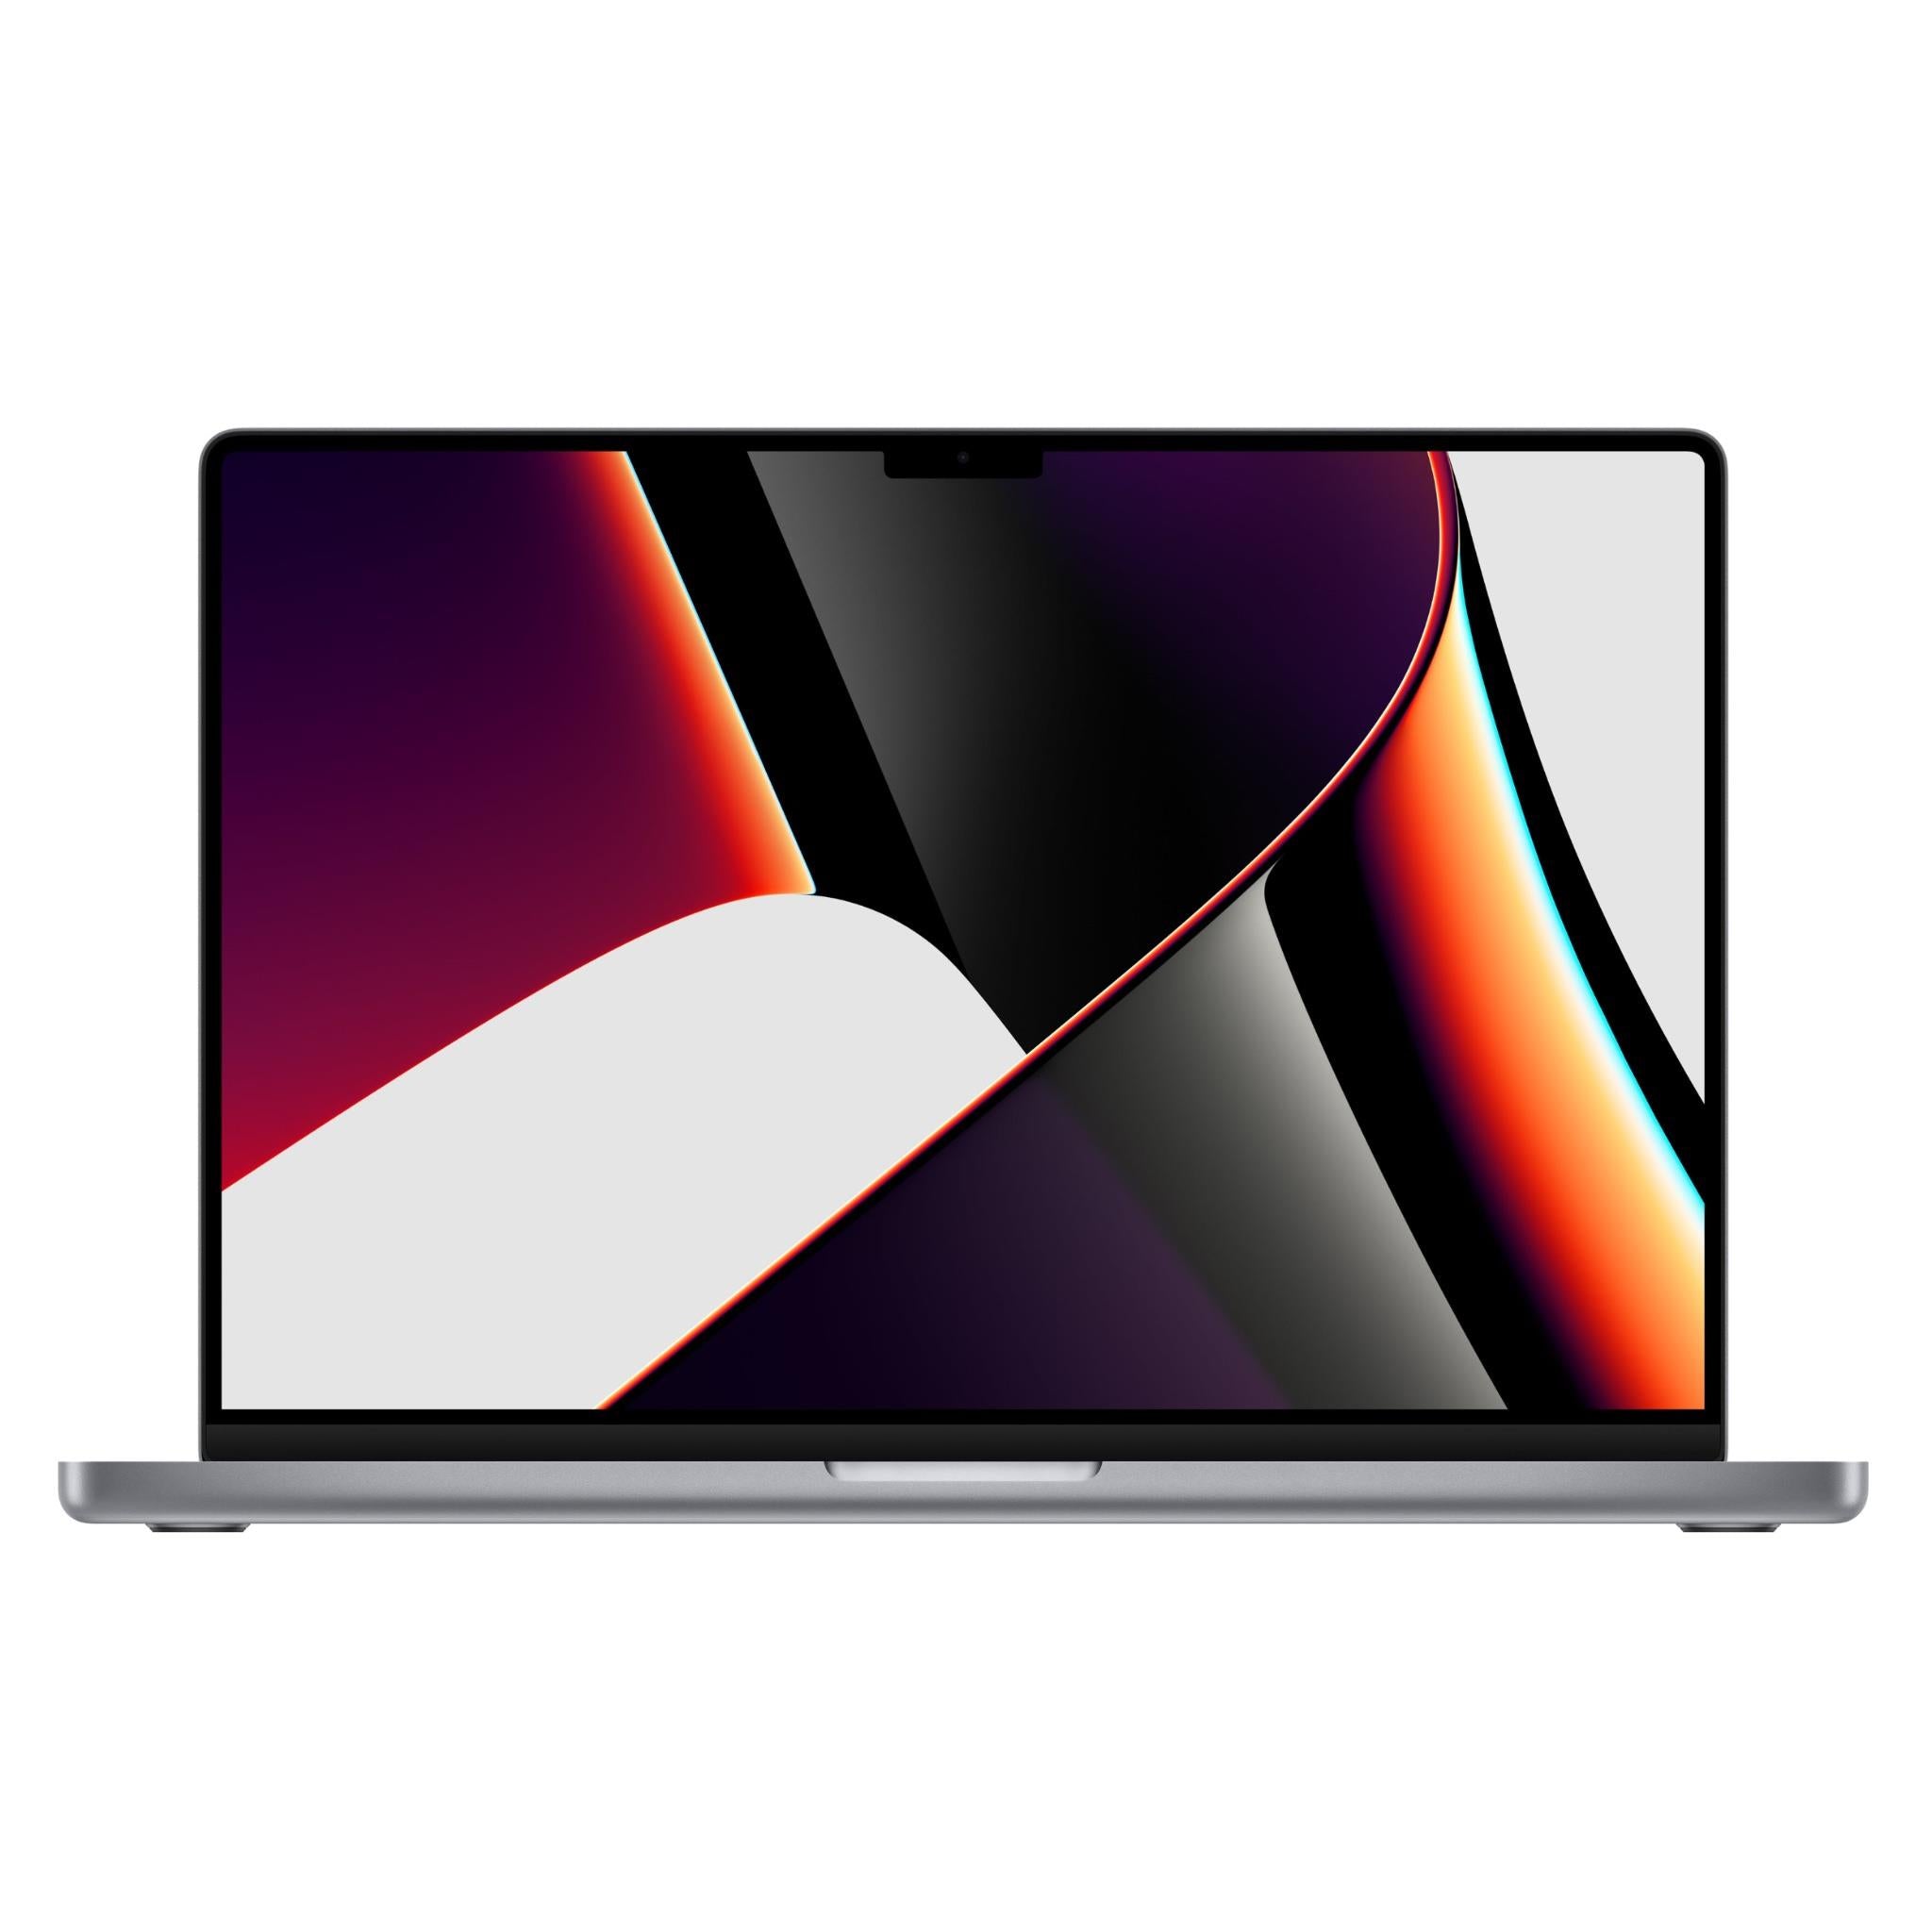 apple macbook pro 16-inch with m1 pro chip 512gb ssd (space grey/2021) [^refurbished]